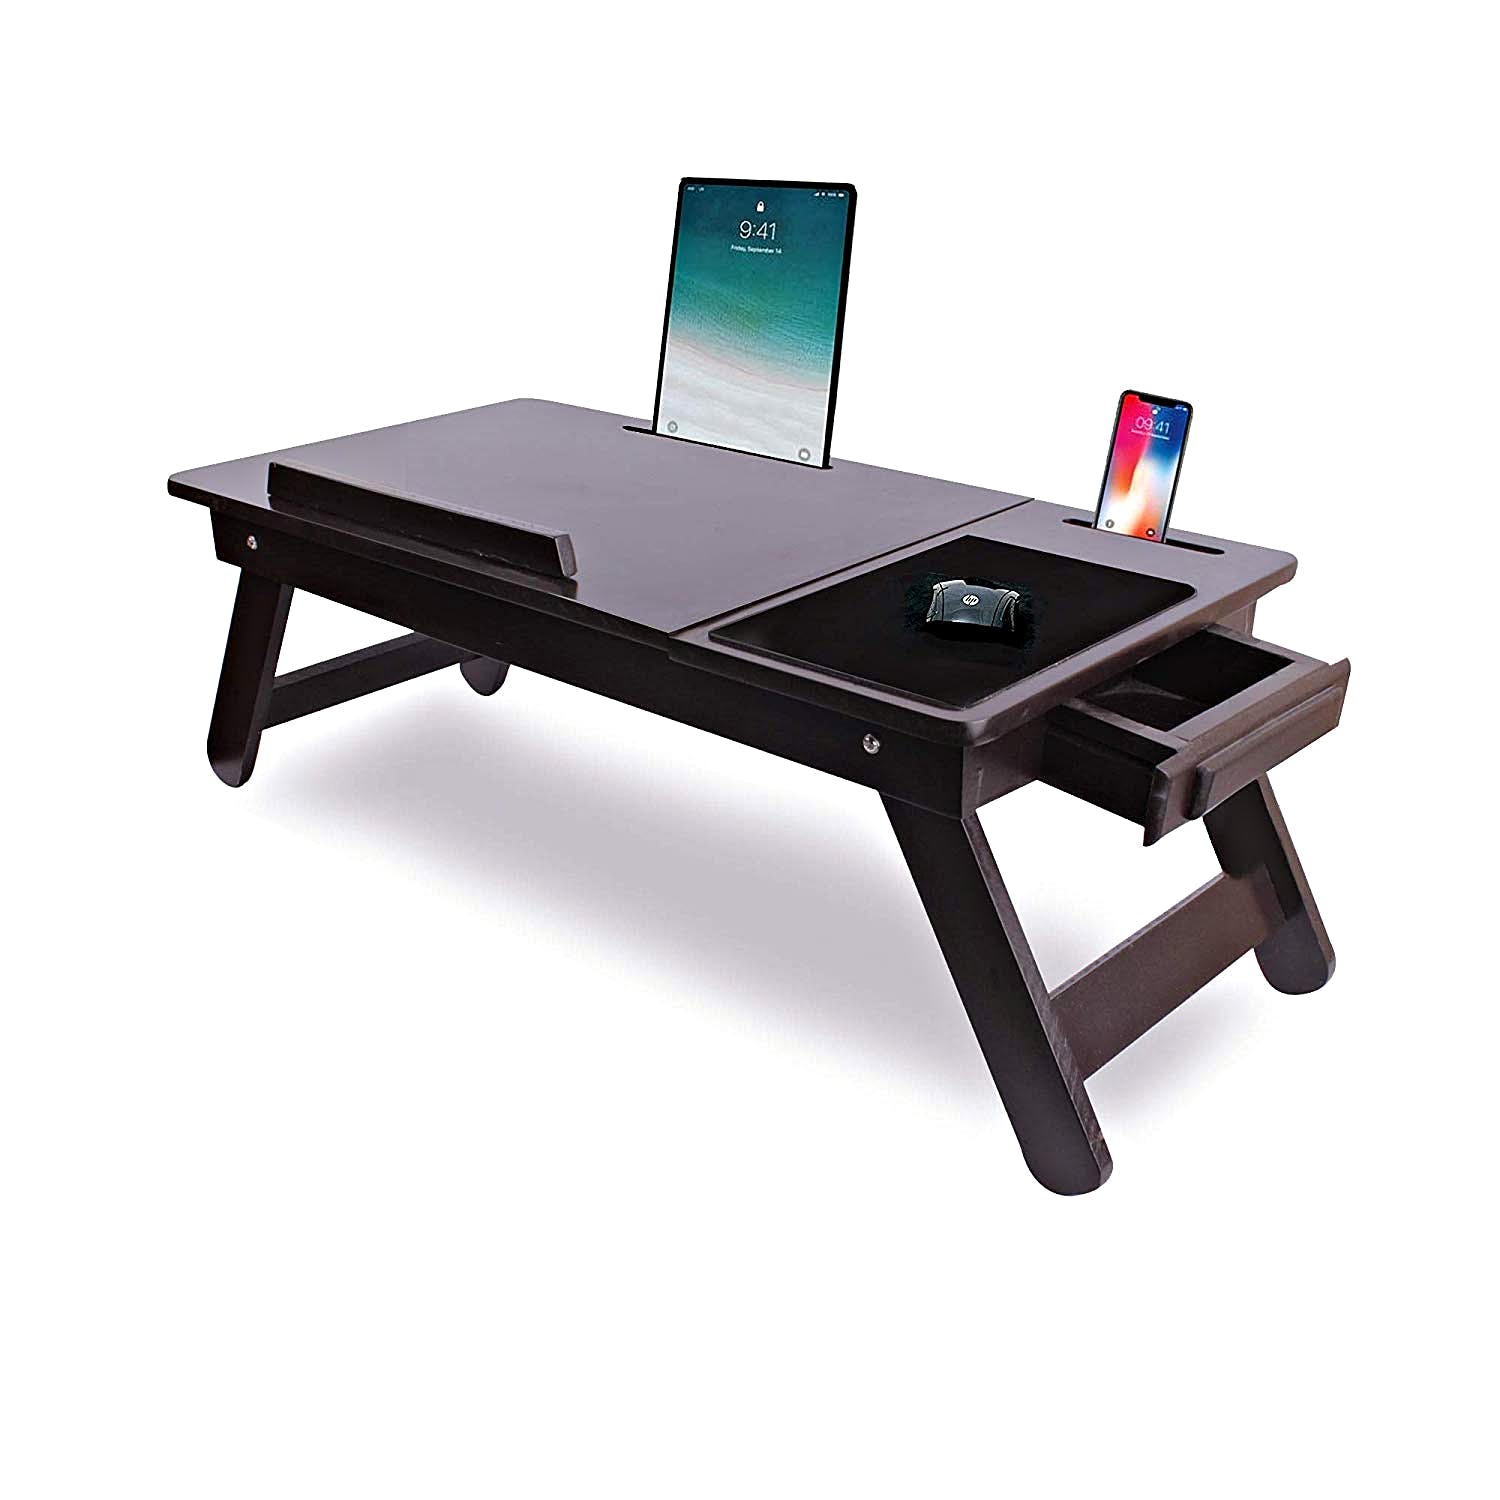 Wooden Foldable Multi-Function Portable Laptop Table